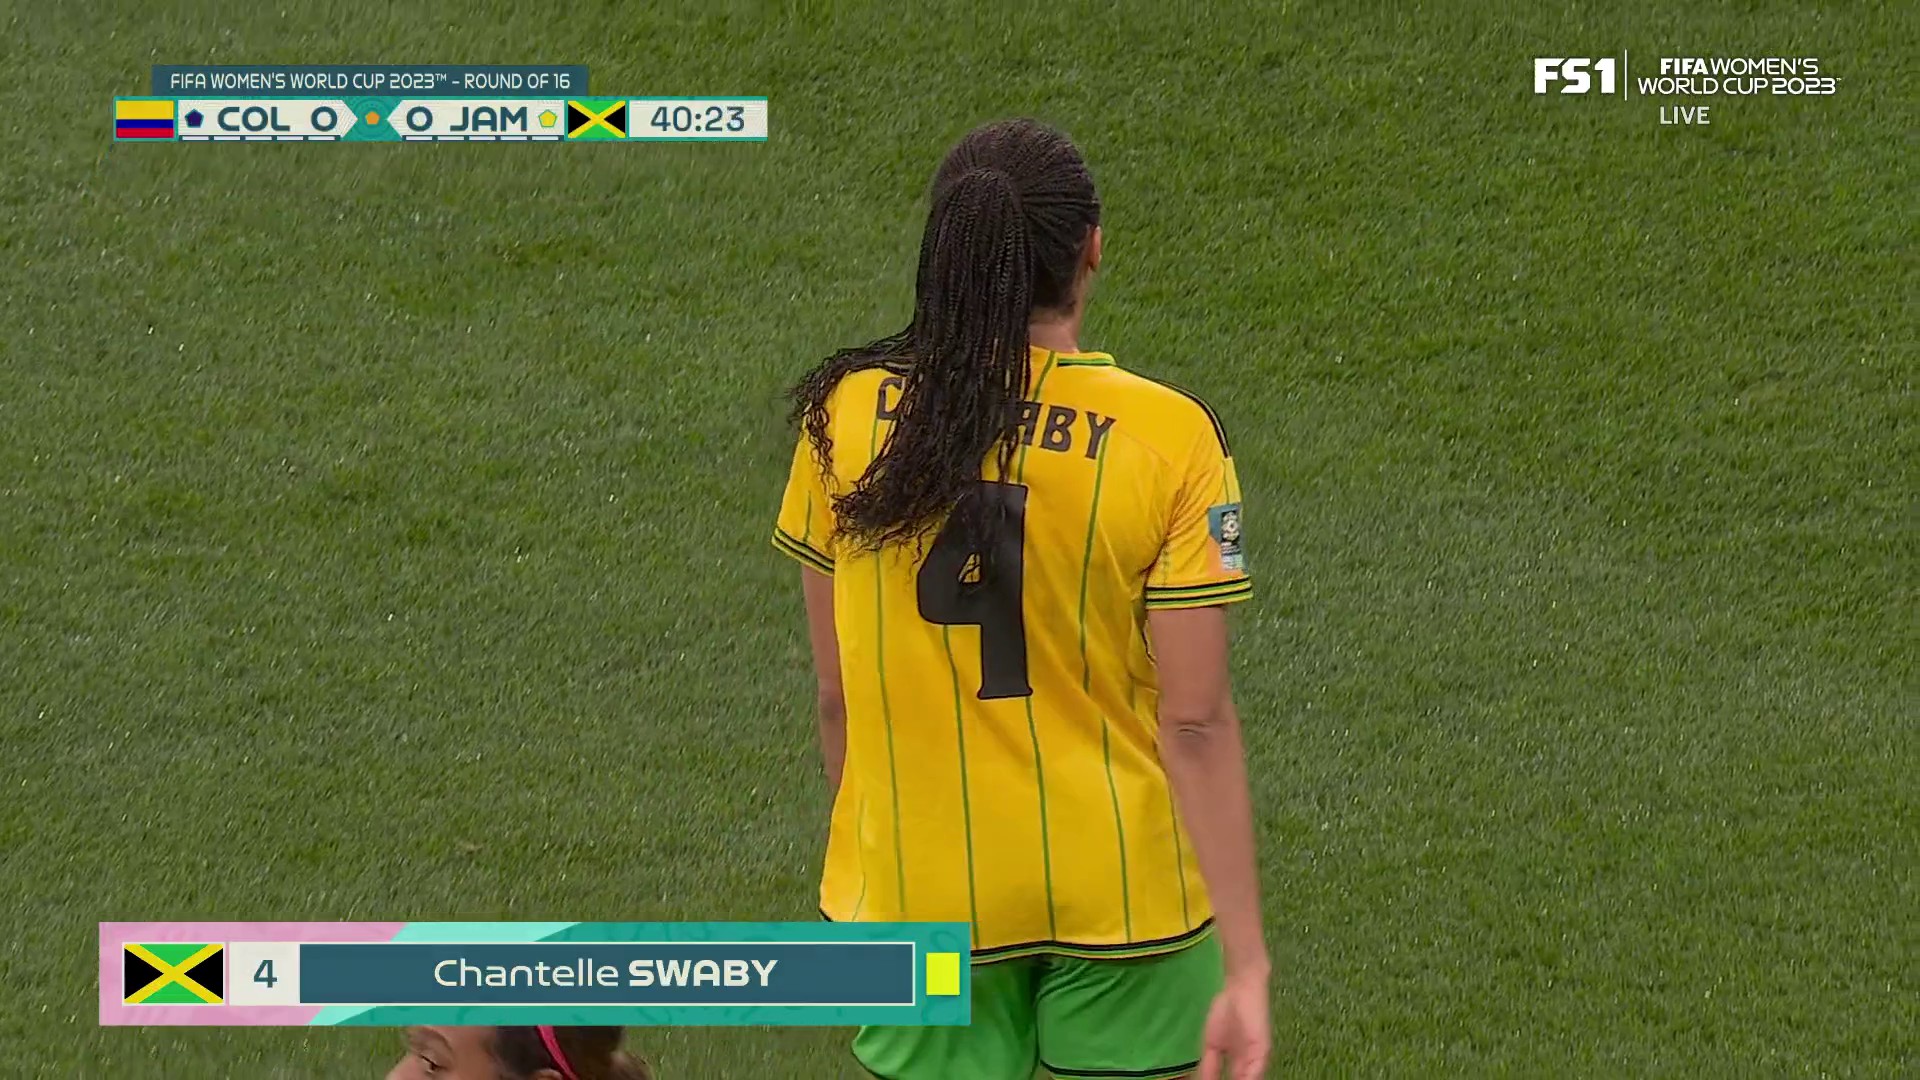 Chantelle Swaby was not having it 😂😂 (via FOXSoccer/TW) #soccer #wor